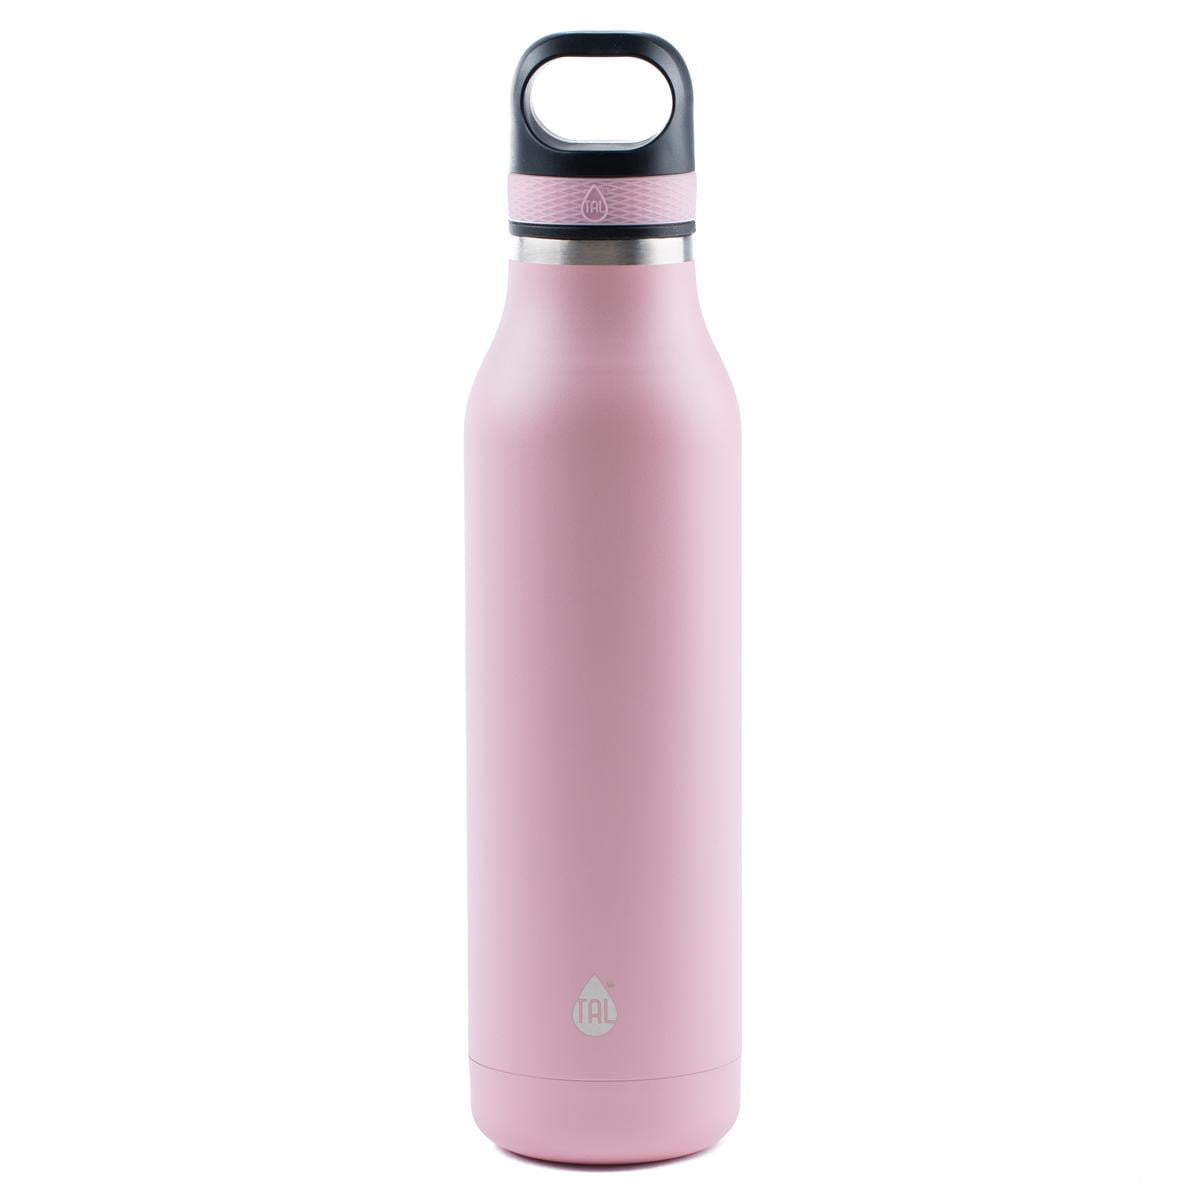 Americana - Gallantly Streaming, 24 oz Venture Lite Insulated Water Bottles